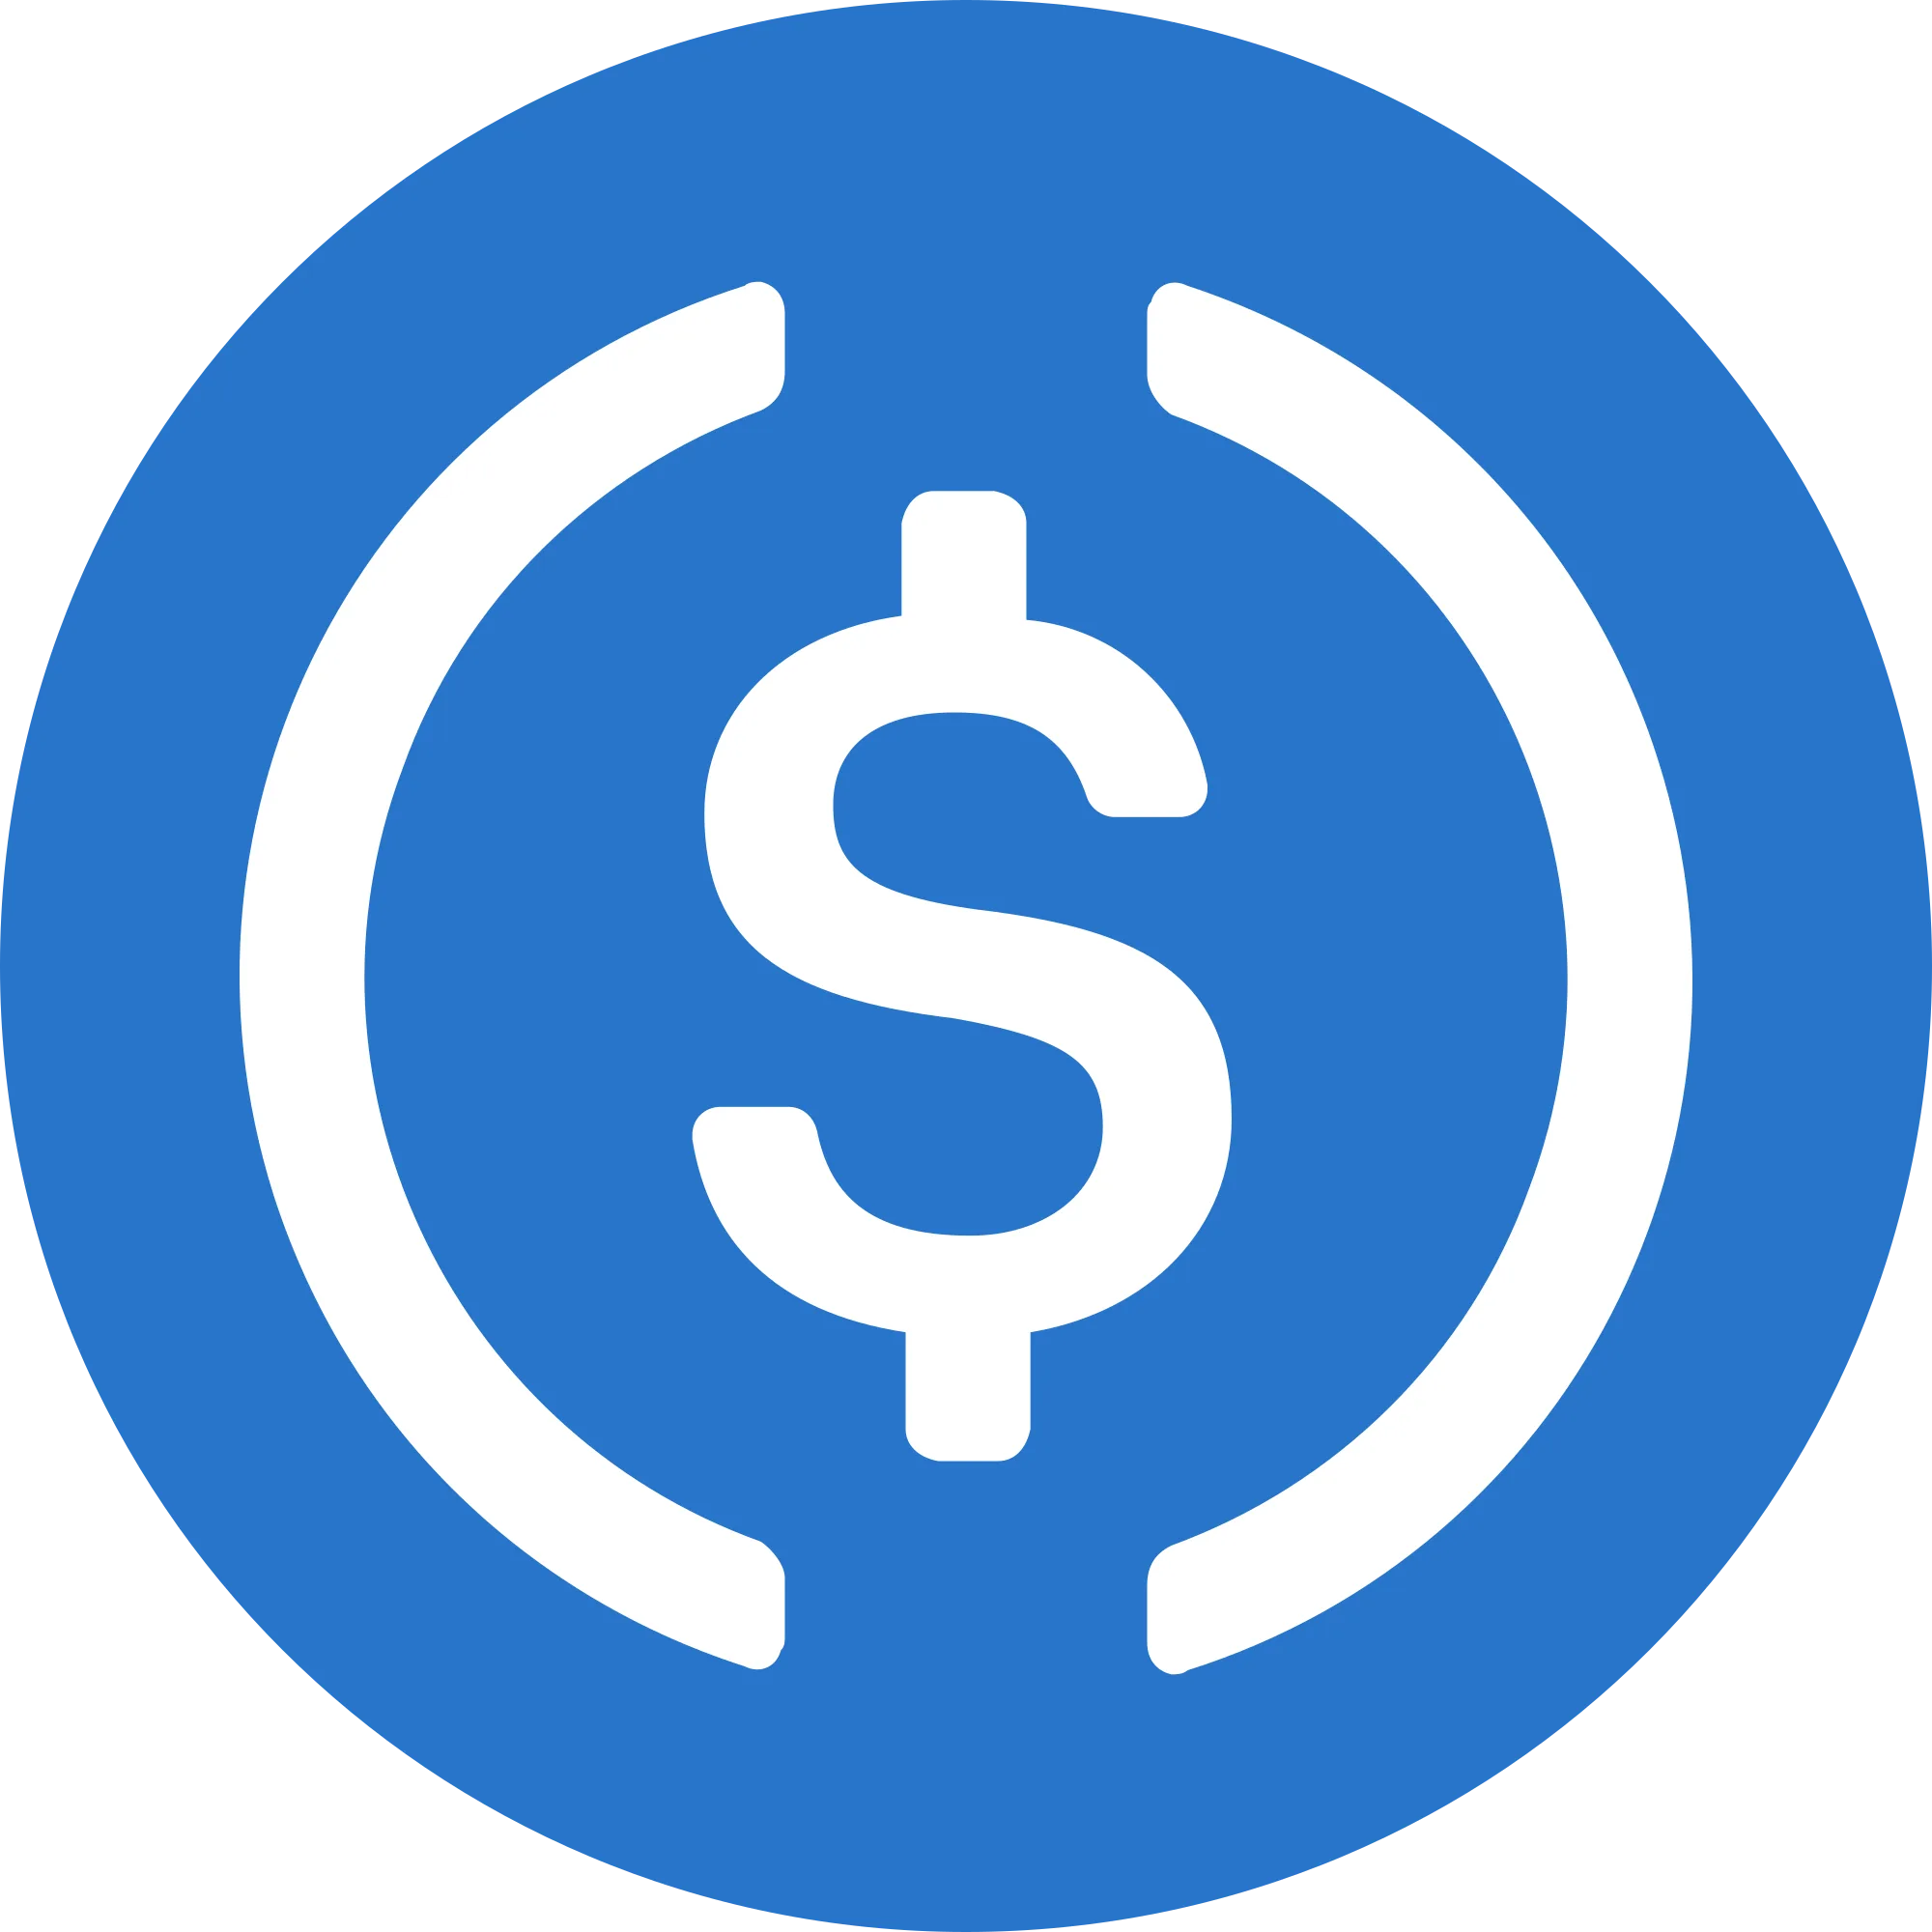 USD Coin logo in png format